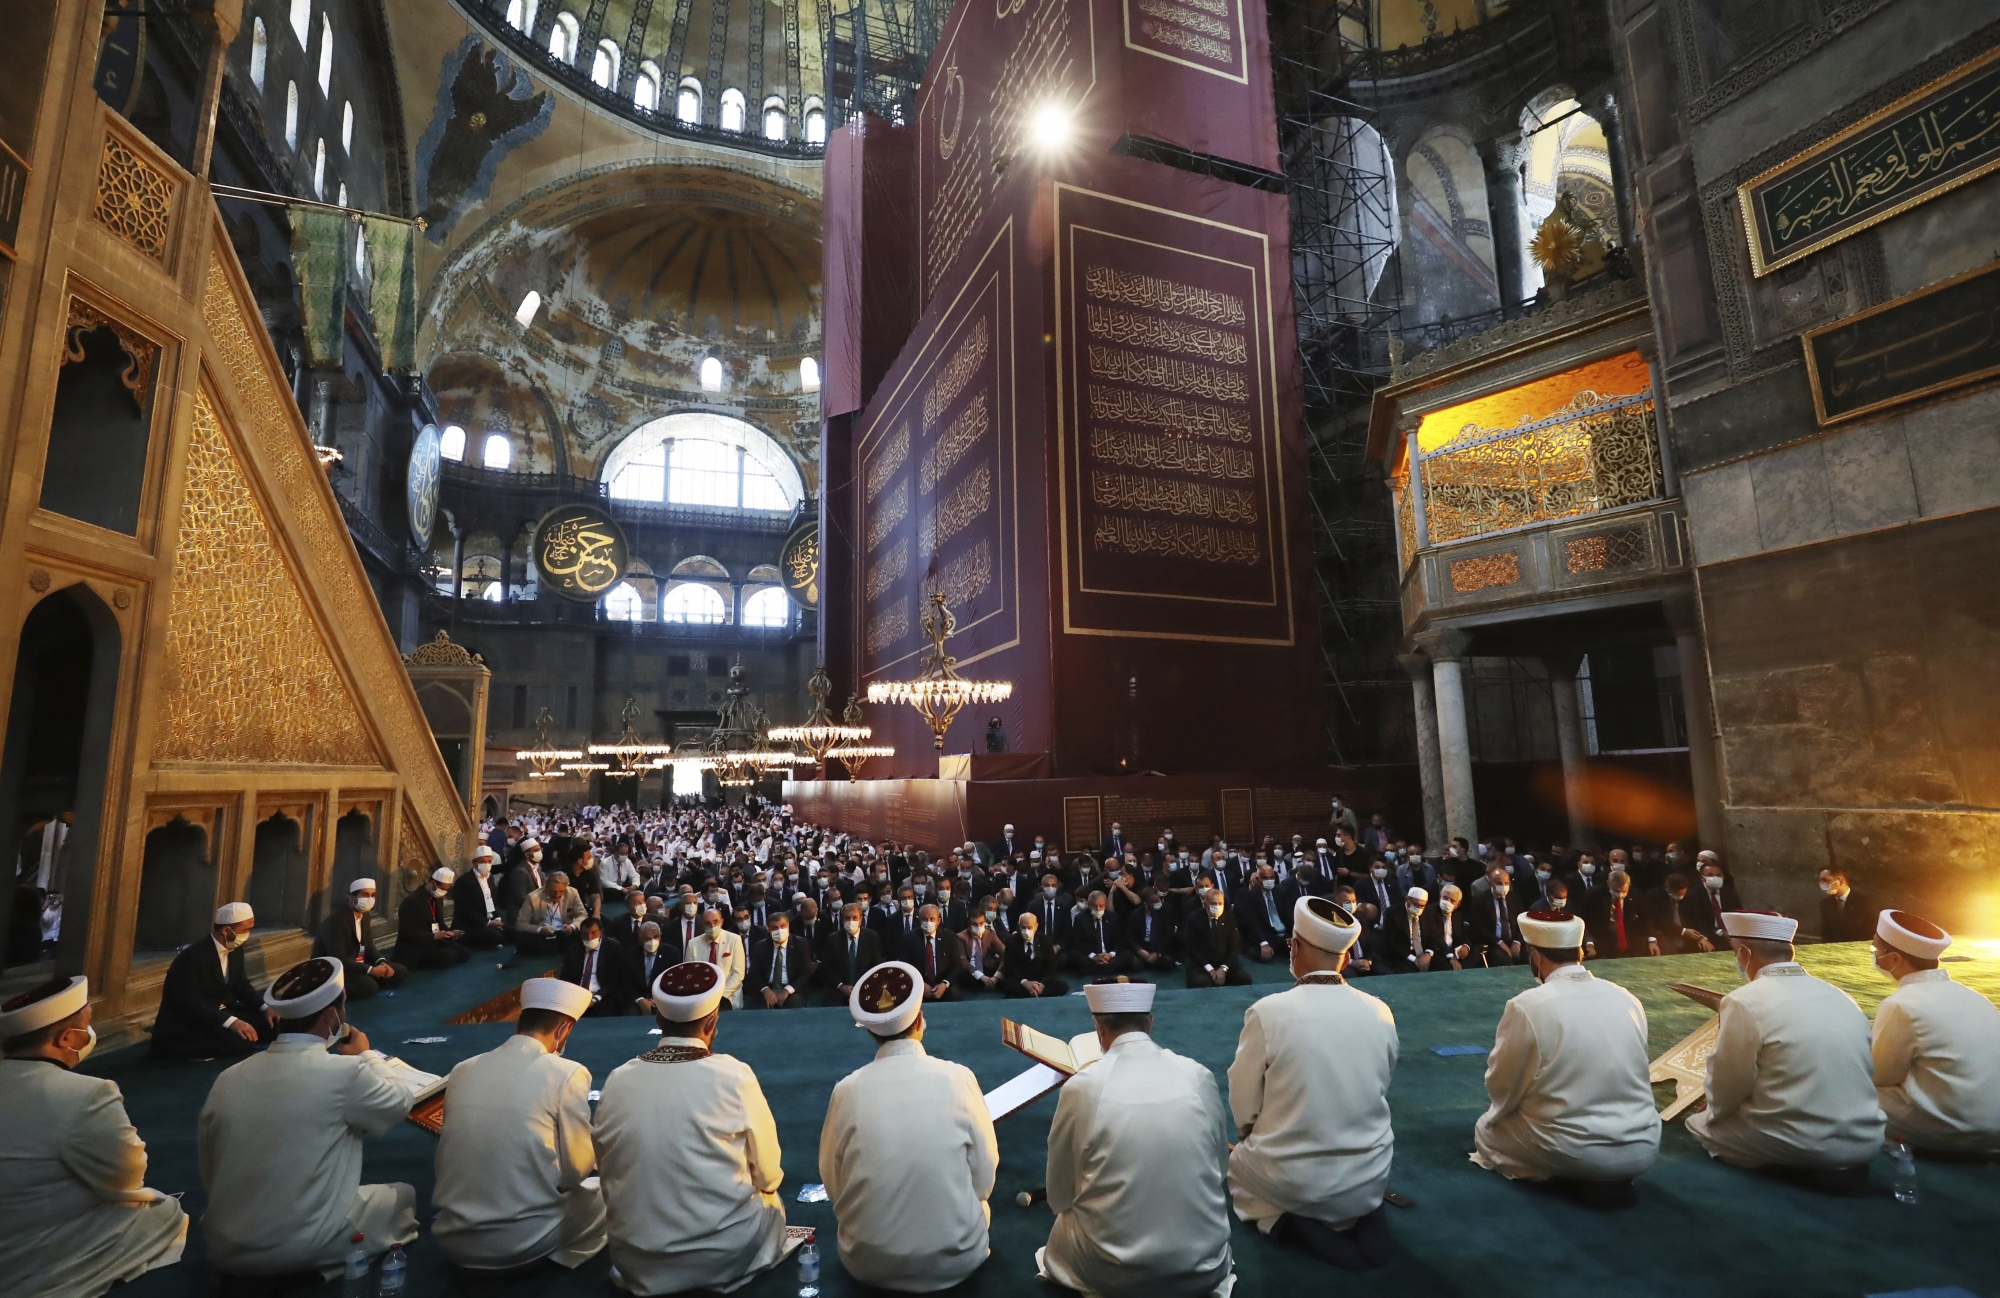 Imams read sermons as Friday as dignitaries including Turkey's President Recep Tayyip Erdogan take part in Friday prayers in Hagia Sophia, at the historic Sultanahmet district of Istanbul, Friday, July 24, 2020. Fulfilling a dream of his Islamic-oriented youth, Erdogan joined hundreds of worshipers for the first Muslim prayers in 86 years inside the Istanbul landmark that served as one of Christendom's most significant cathedrals, a mosque and a museum before its conversion back into a Muslim place of worship. The conversion of the edifice, has led to an international outcry. (Turkish Presidency via AP, Pool) ArcInfo